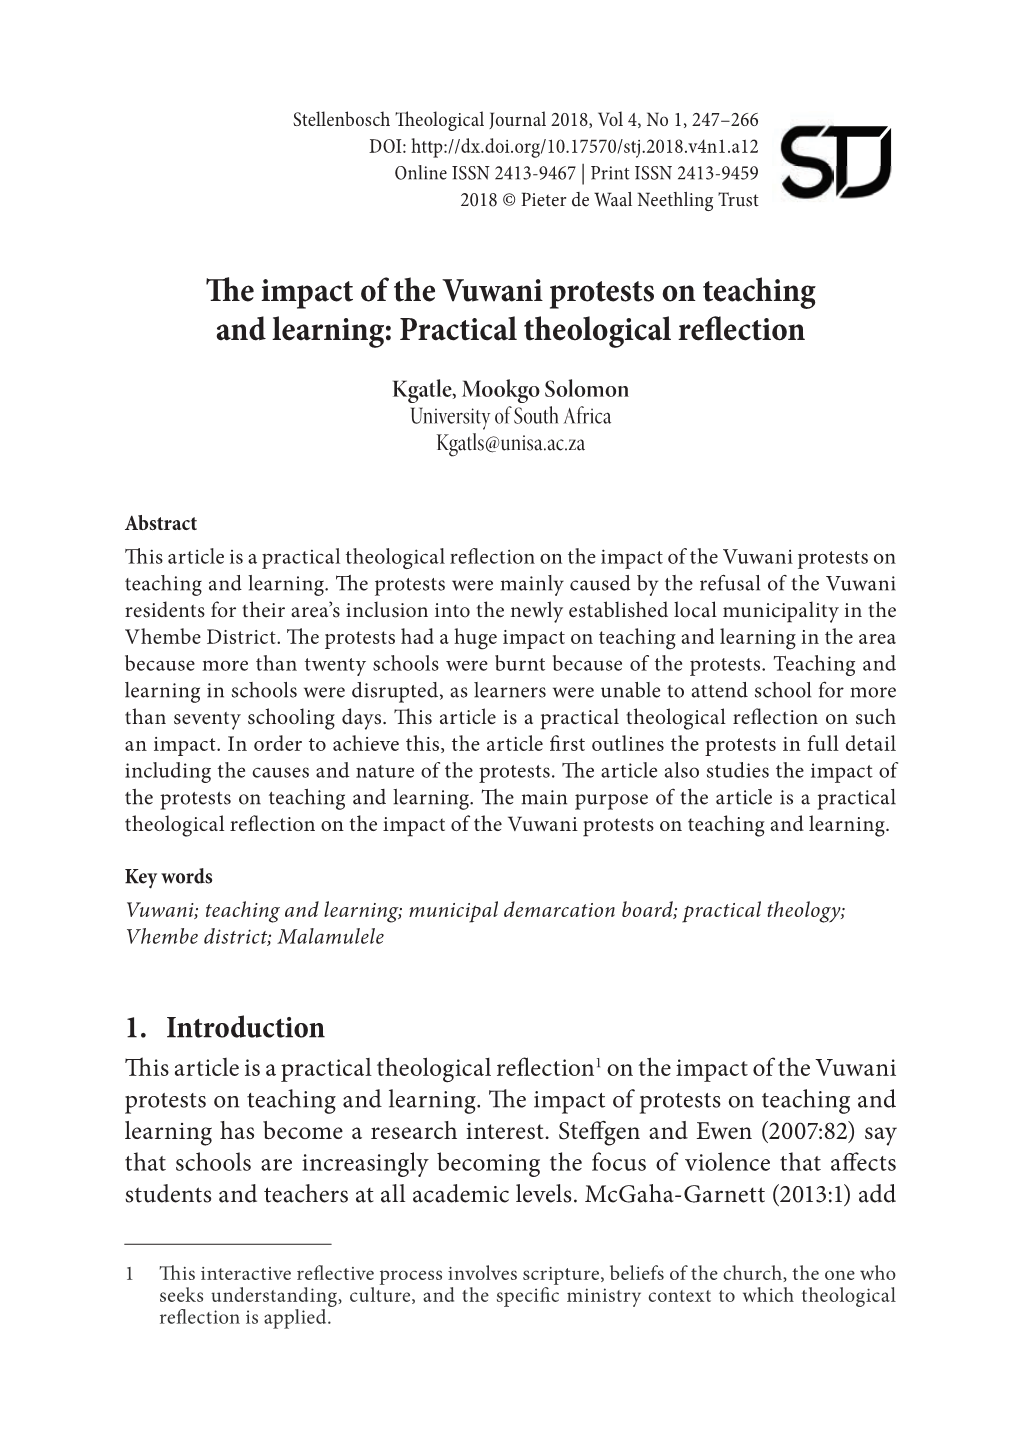 E Impact of the Vuwani Protests on Teaching and Learning: Practical Theological Re Ection